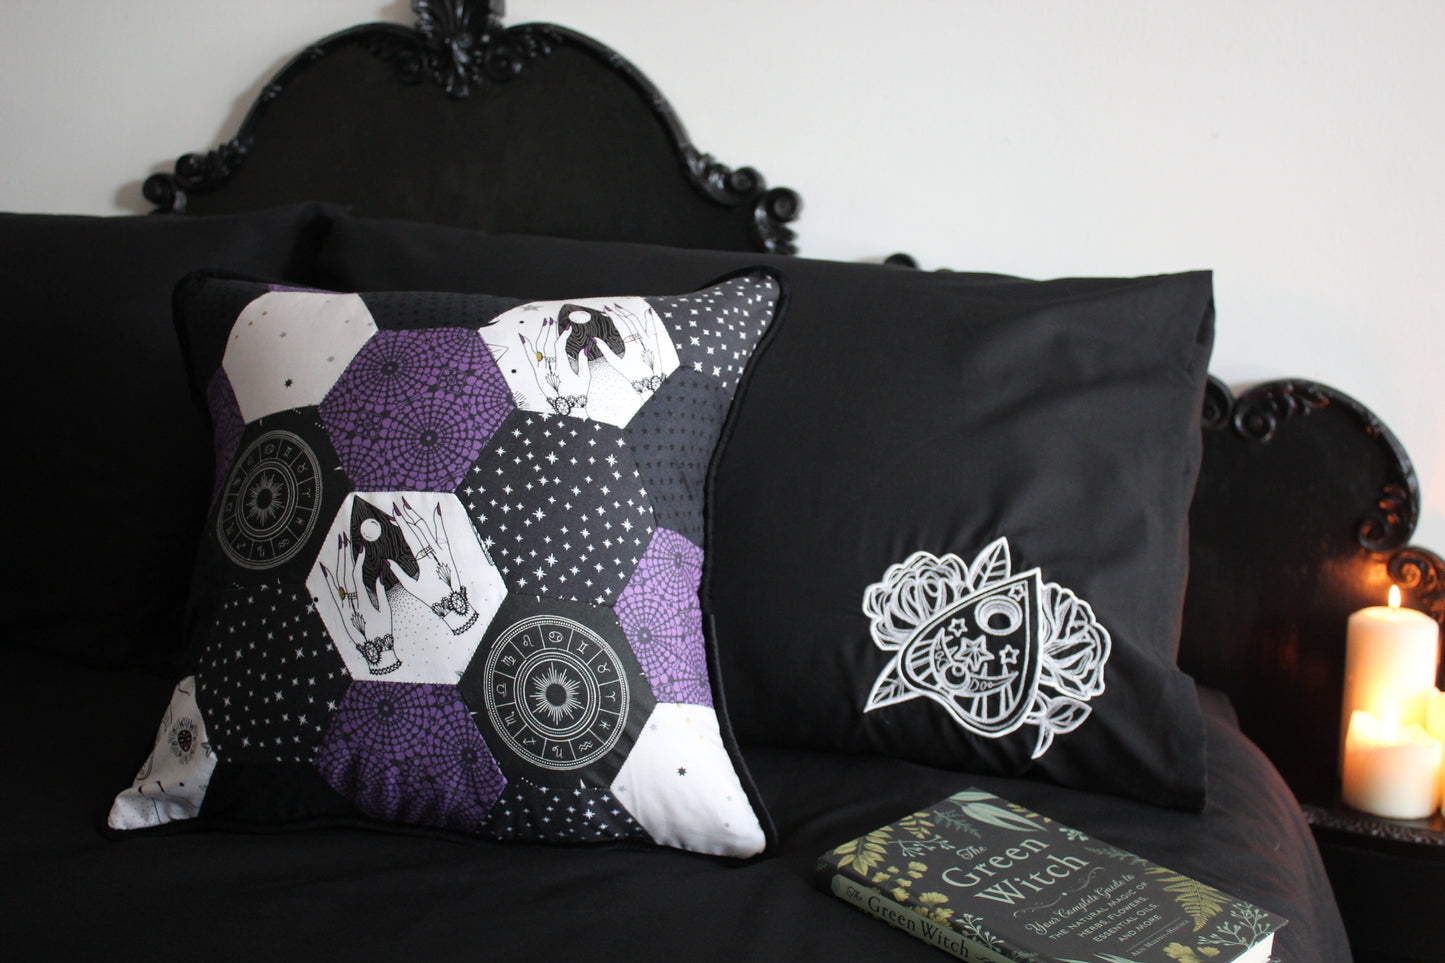 A shot of luxury witchy room decor, featuring an ornate black bed, candles glowing, beside a patchwork cushion in grey, white and purple featuring planchettes and stars. There is a black pillowcase with a white embroidered planchette, with the book The Green Witch in the foreground.